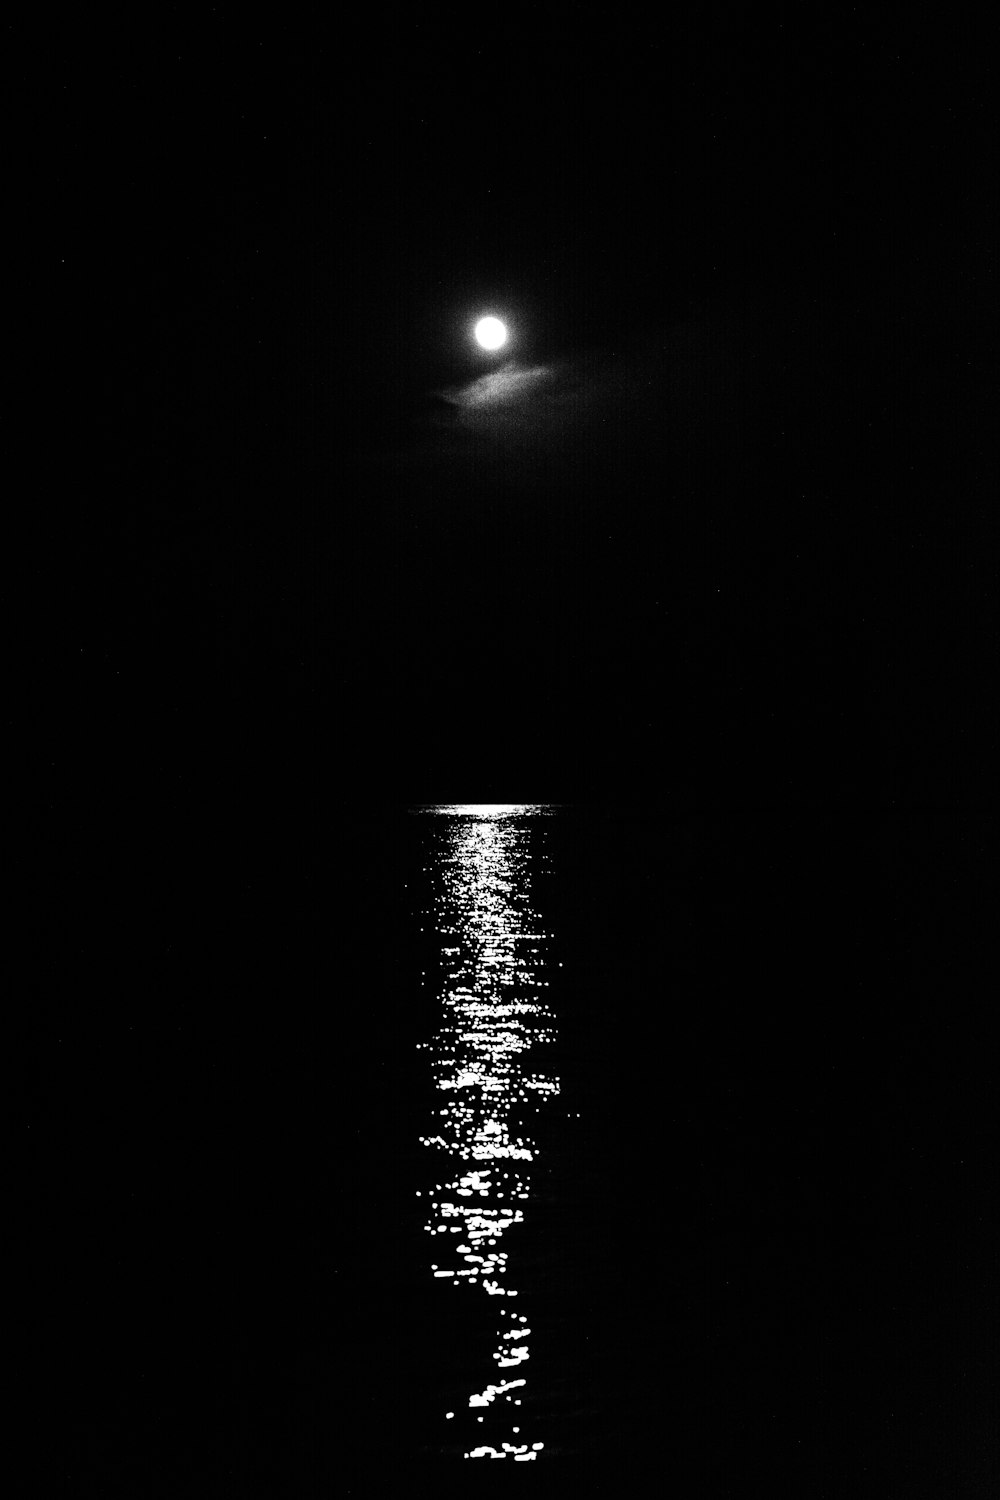 moon above body of water